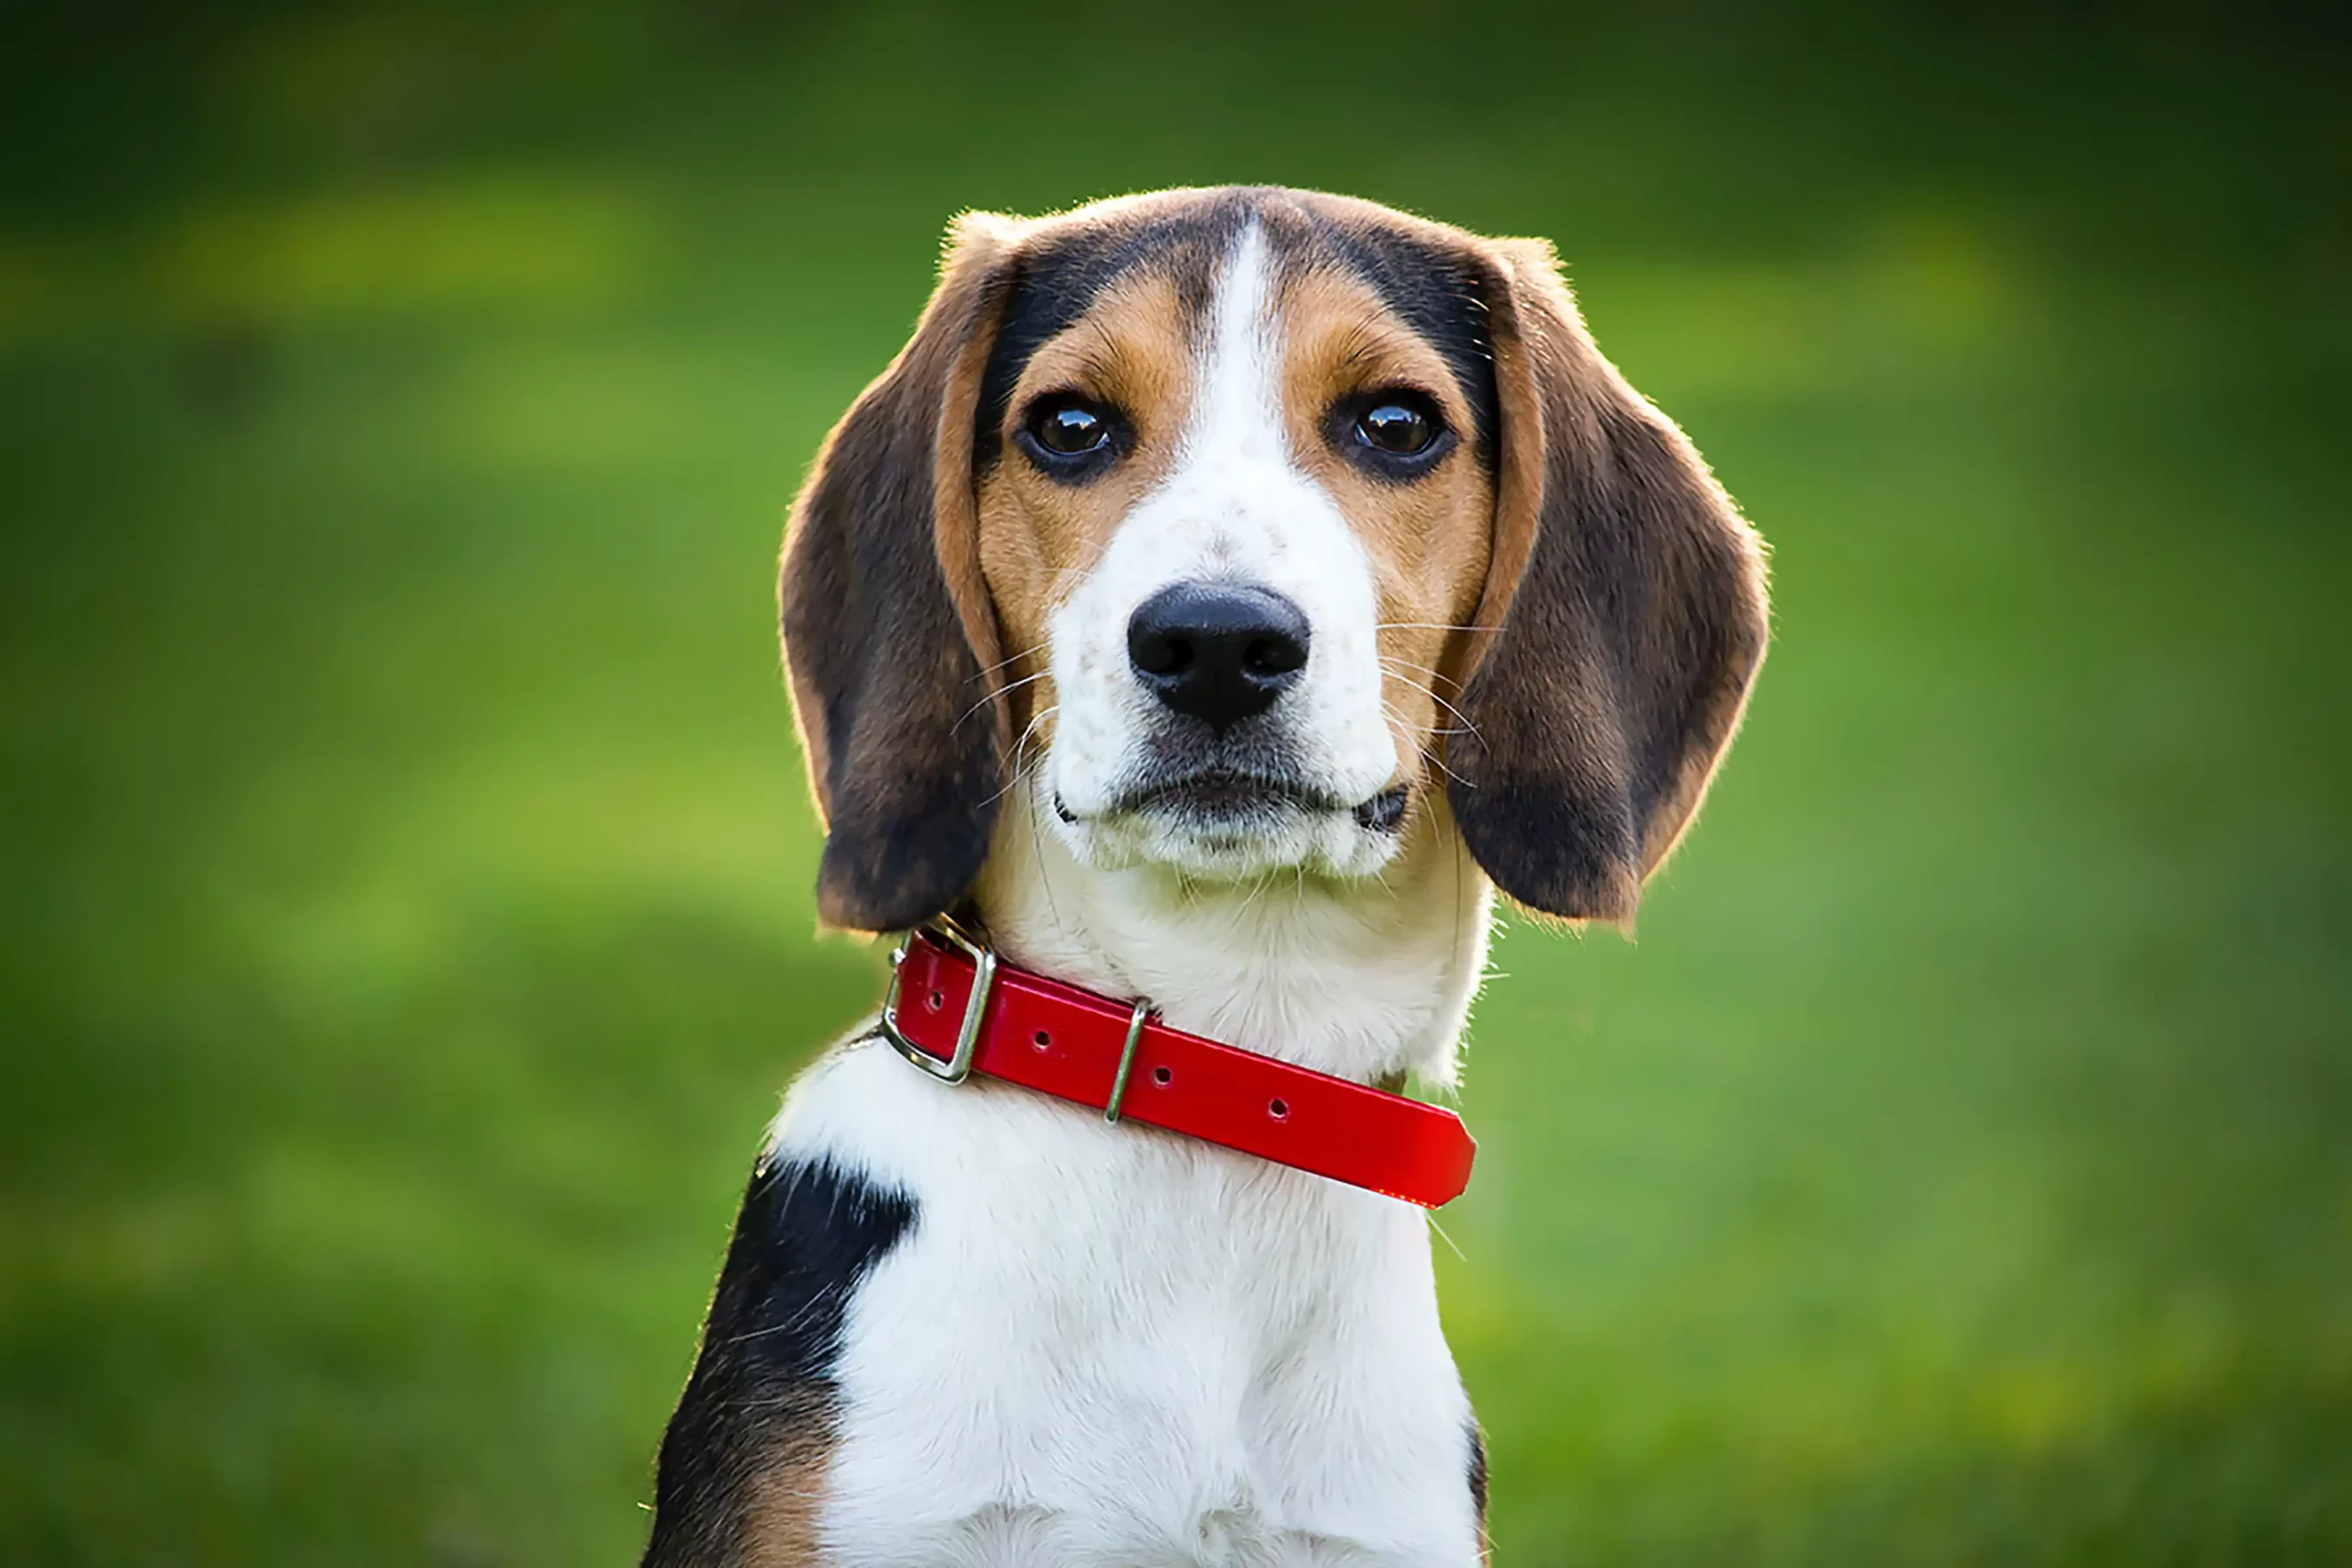 Cute Beagle with red Collar